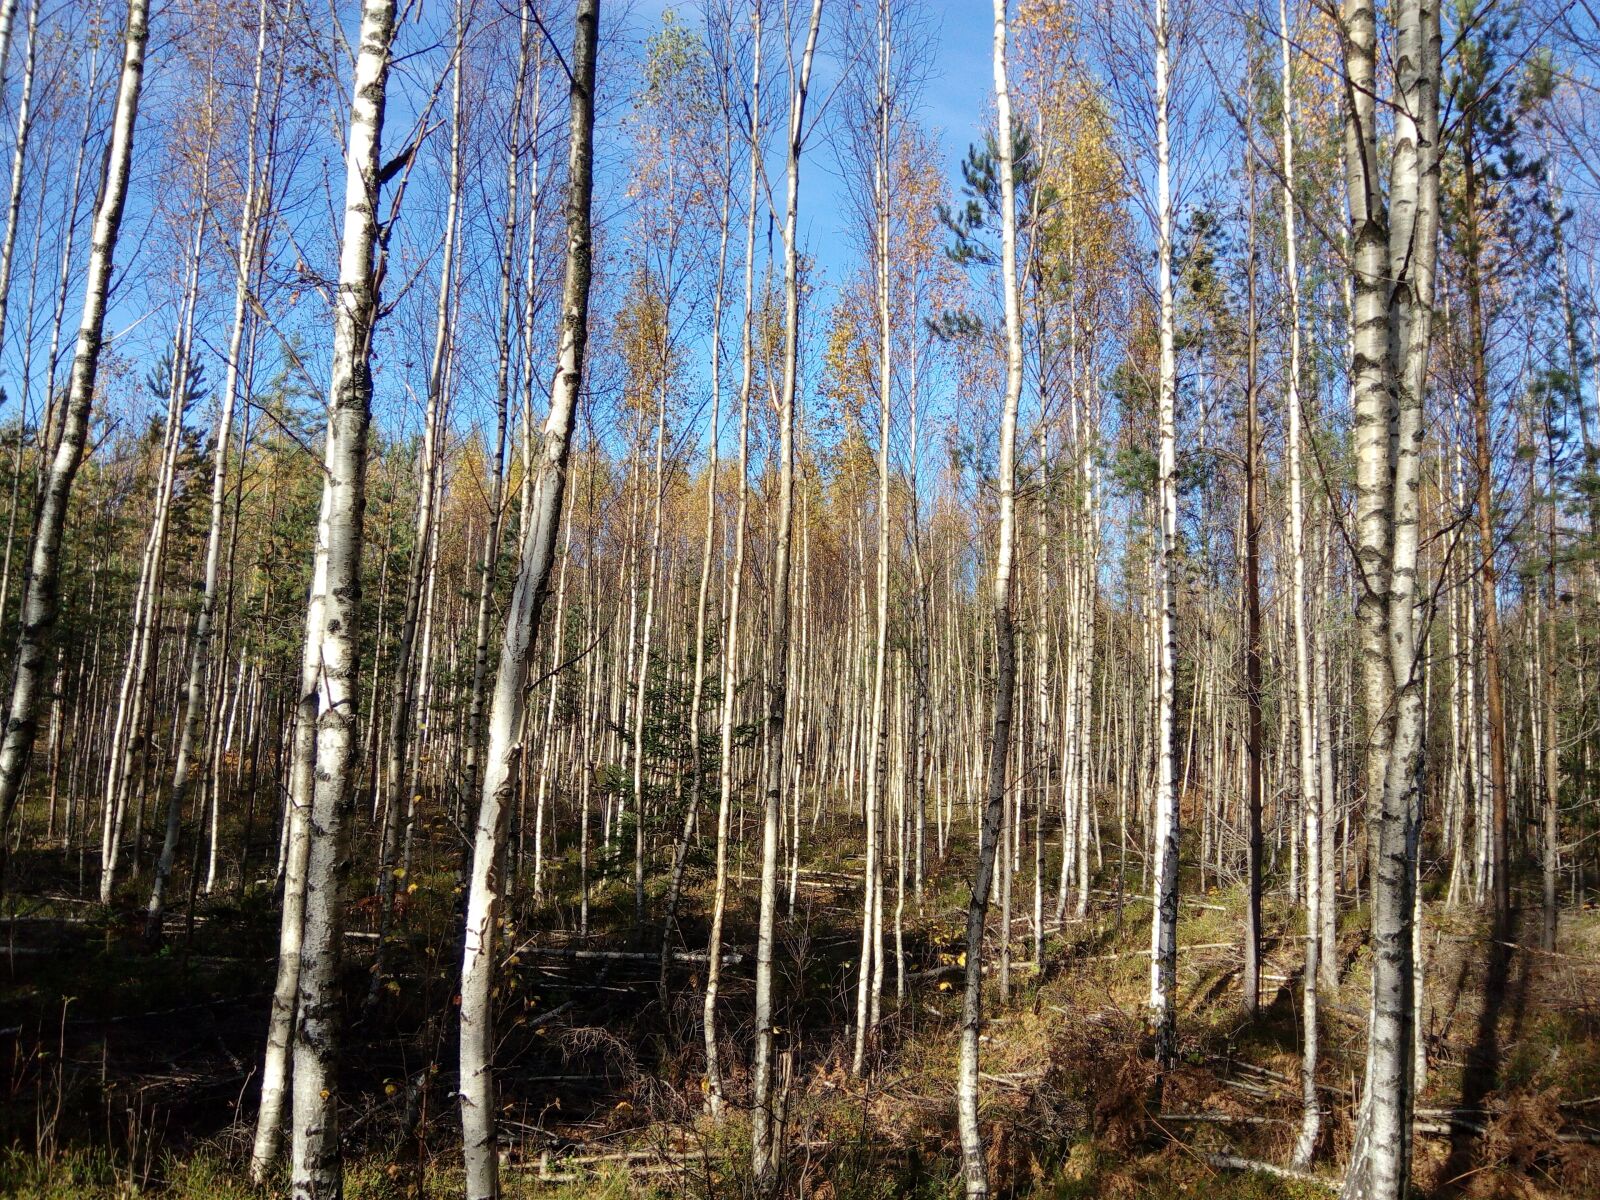 HUAWEI Y6 PRO sample photo. Birch grove, forest, young photography